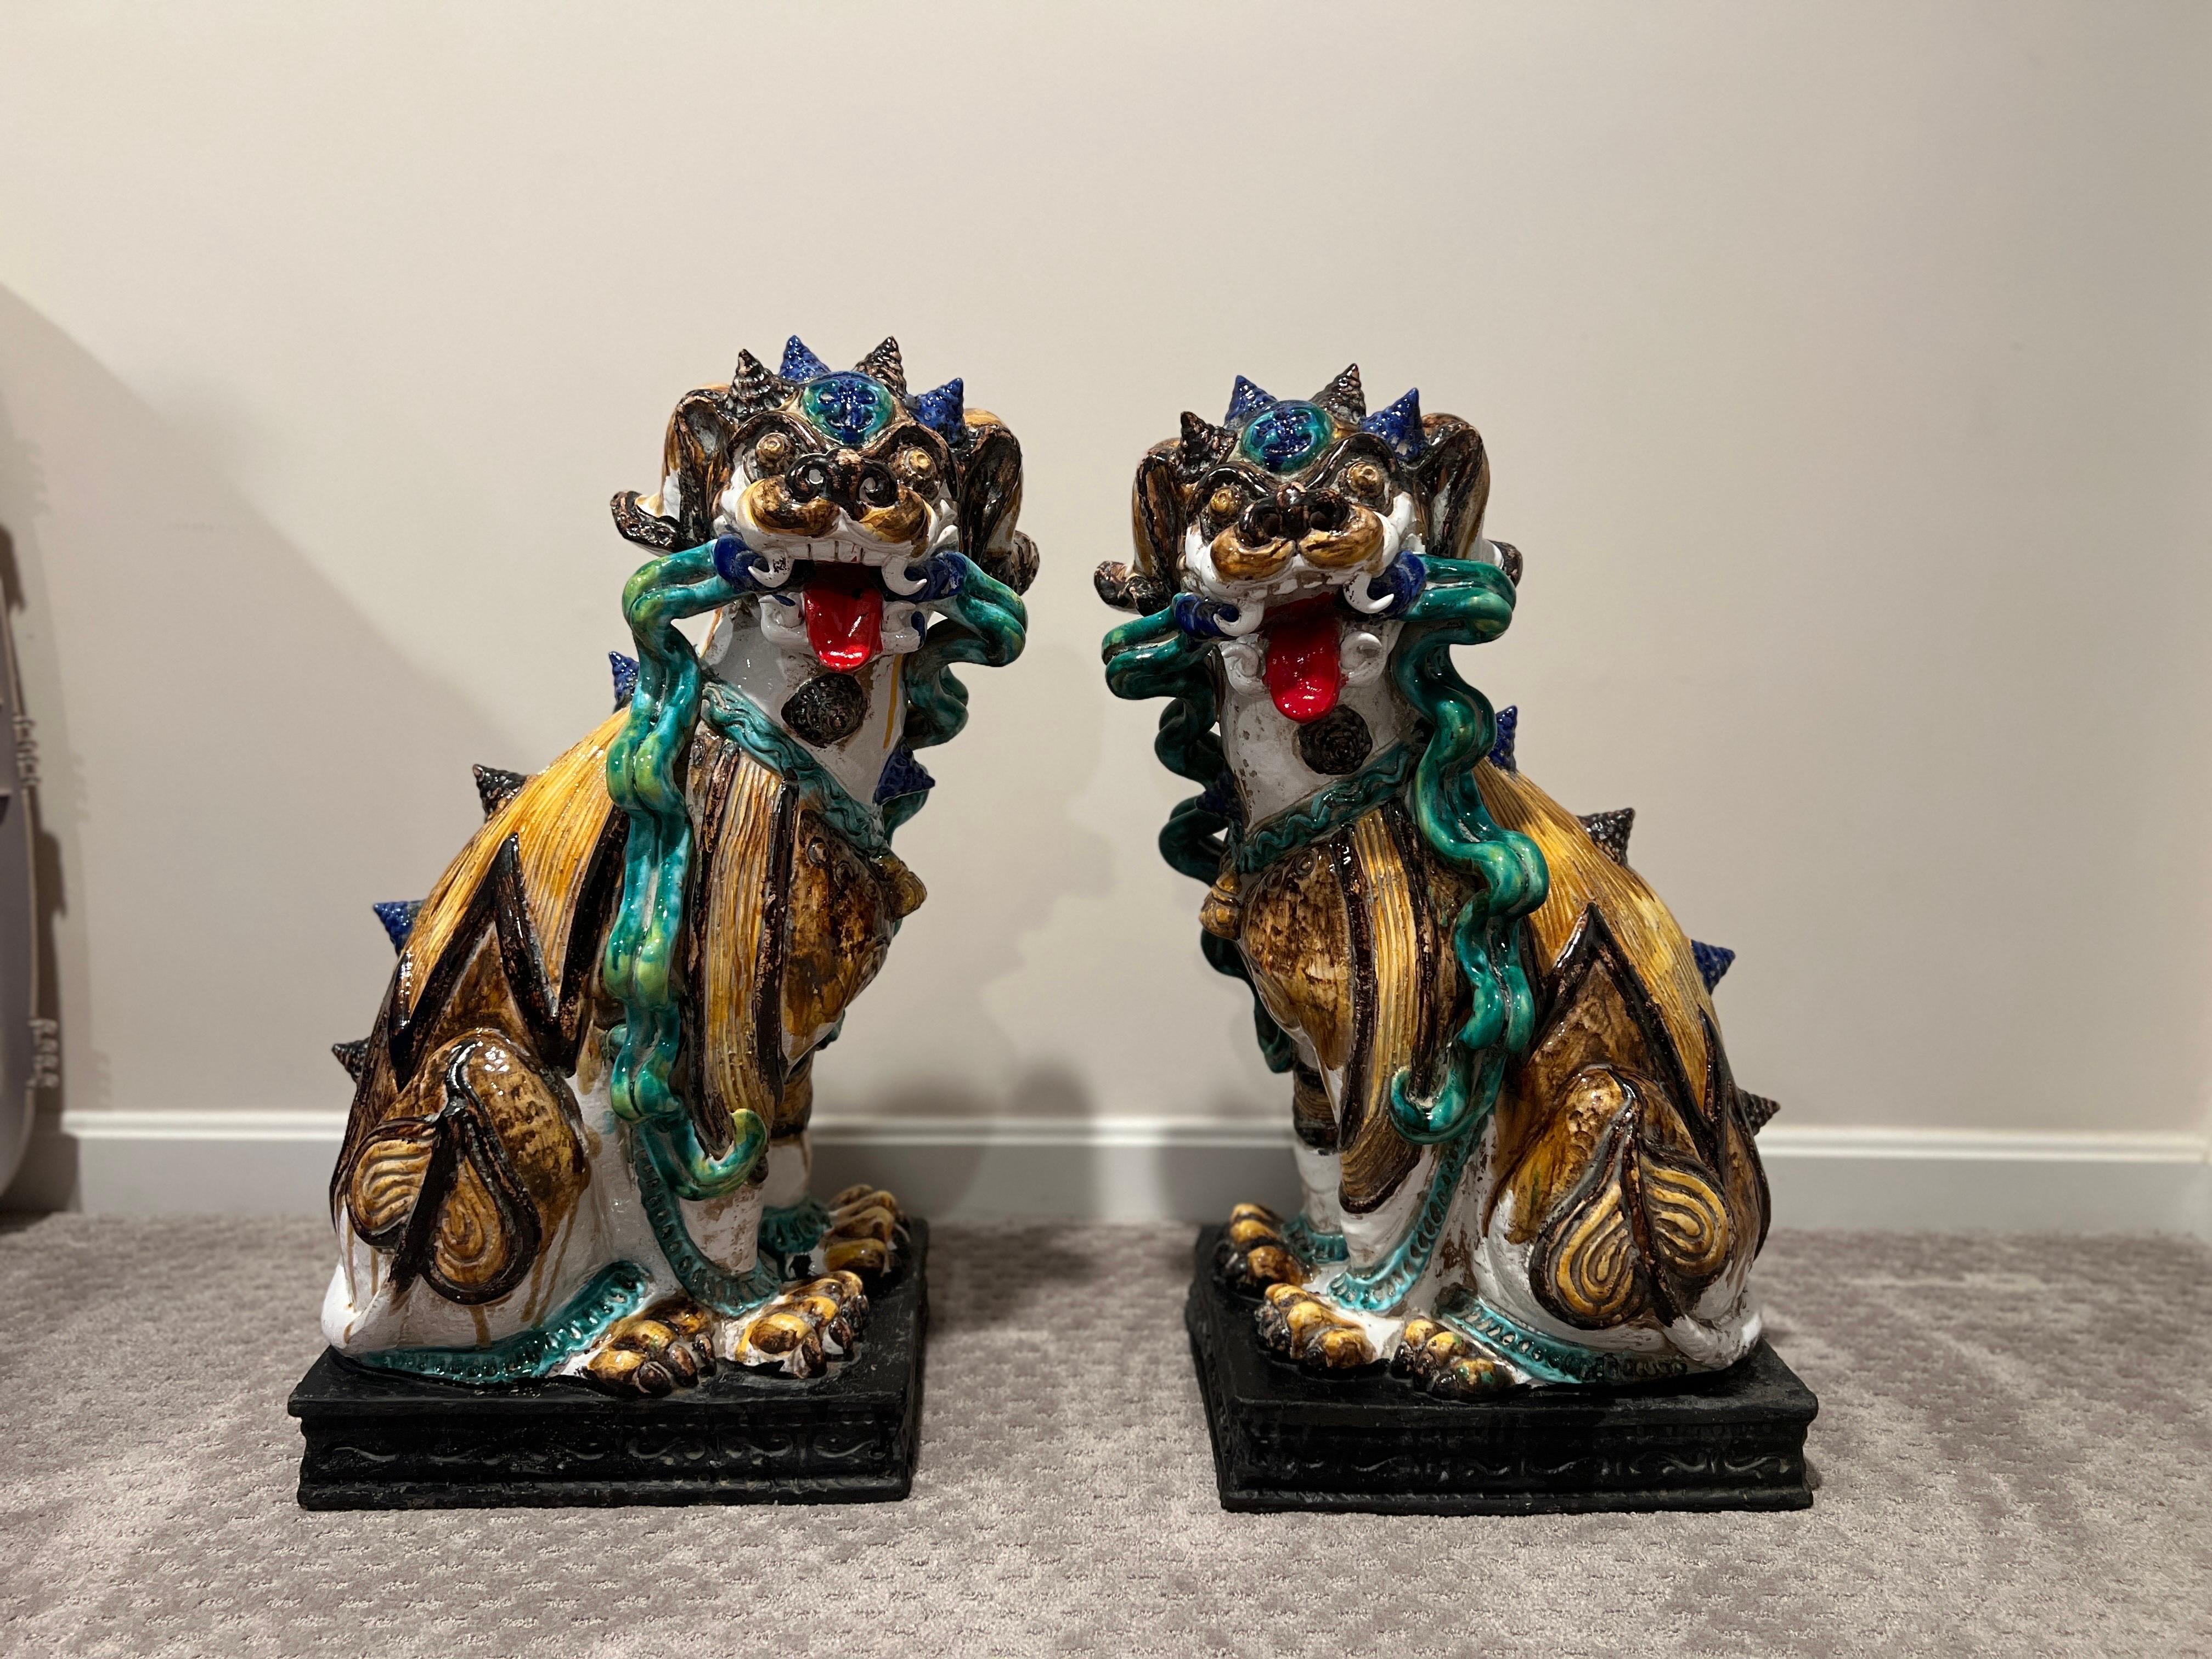 Large Scale Pair of Antique Majolica Ceramic Glazed Guardian Lions or Foo Dogs

These oversized Italian Majolica foo dogs showcase grotesque yet loveably cute features from their twisted fangs, snail shell horns, whispering hair and intricately done